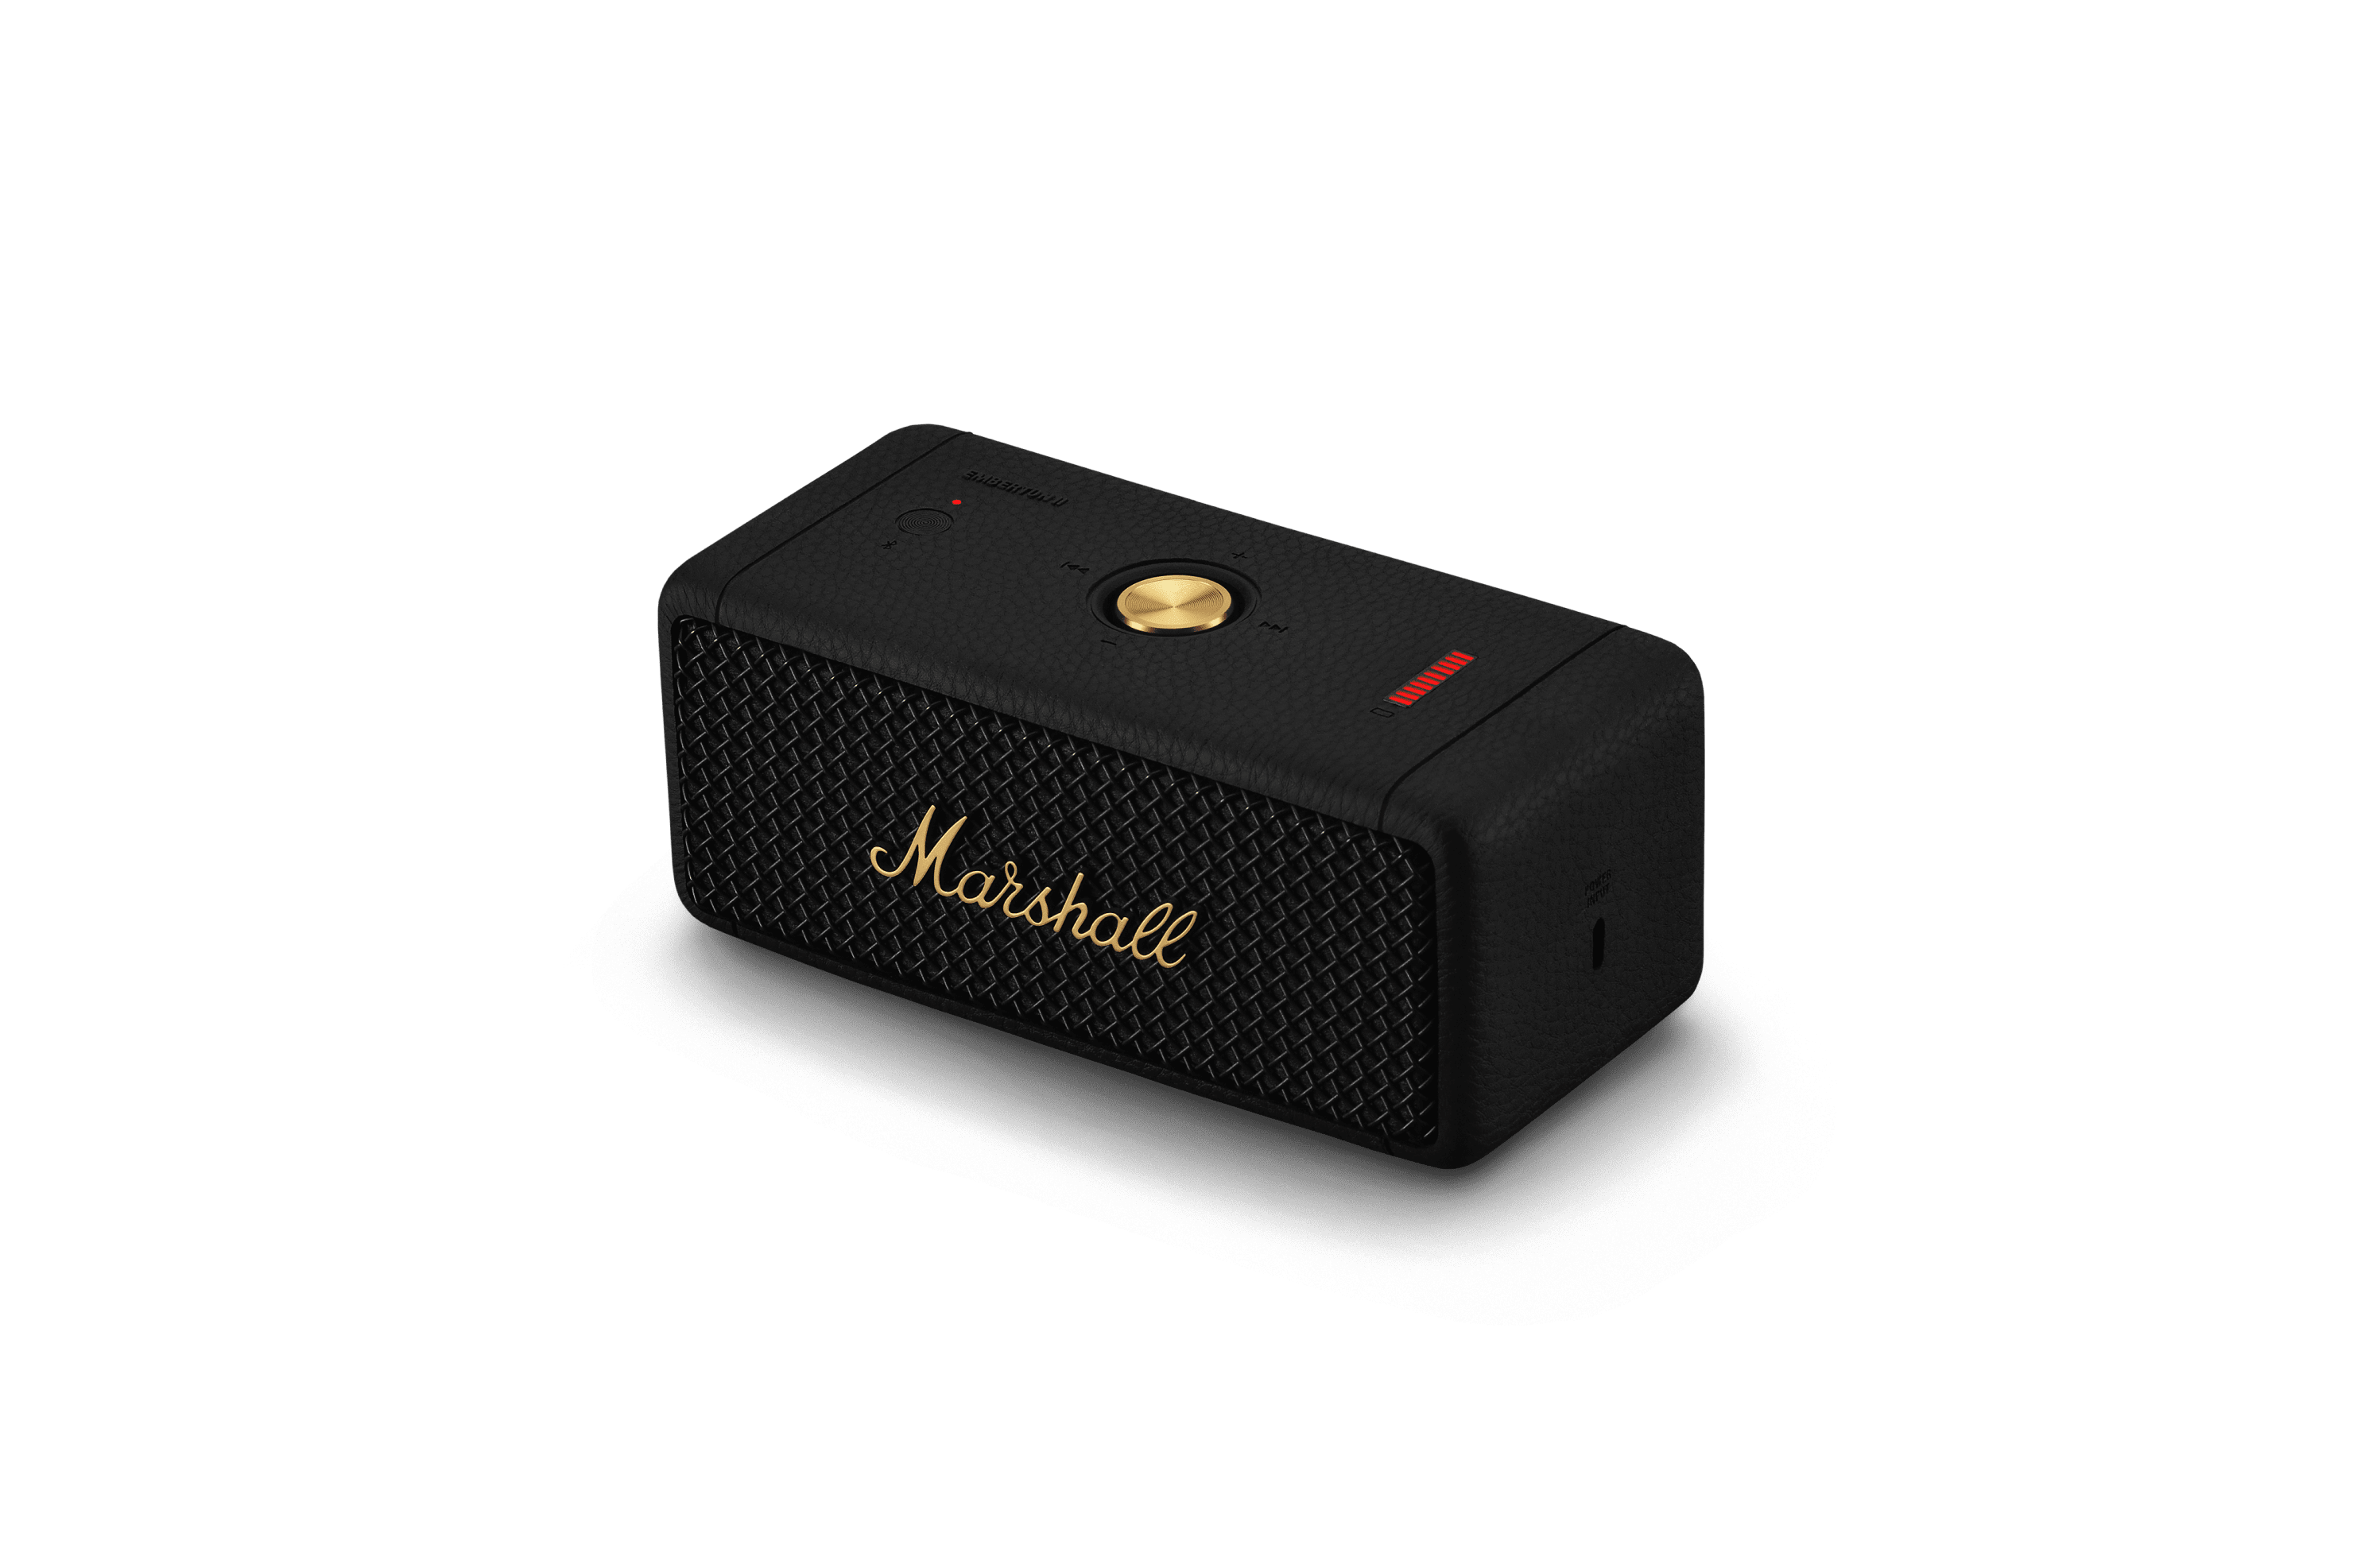 Marshall Emberton Portable Bluetooth Speaker (Forest) Price in